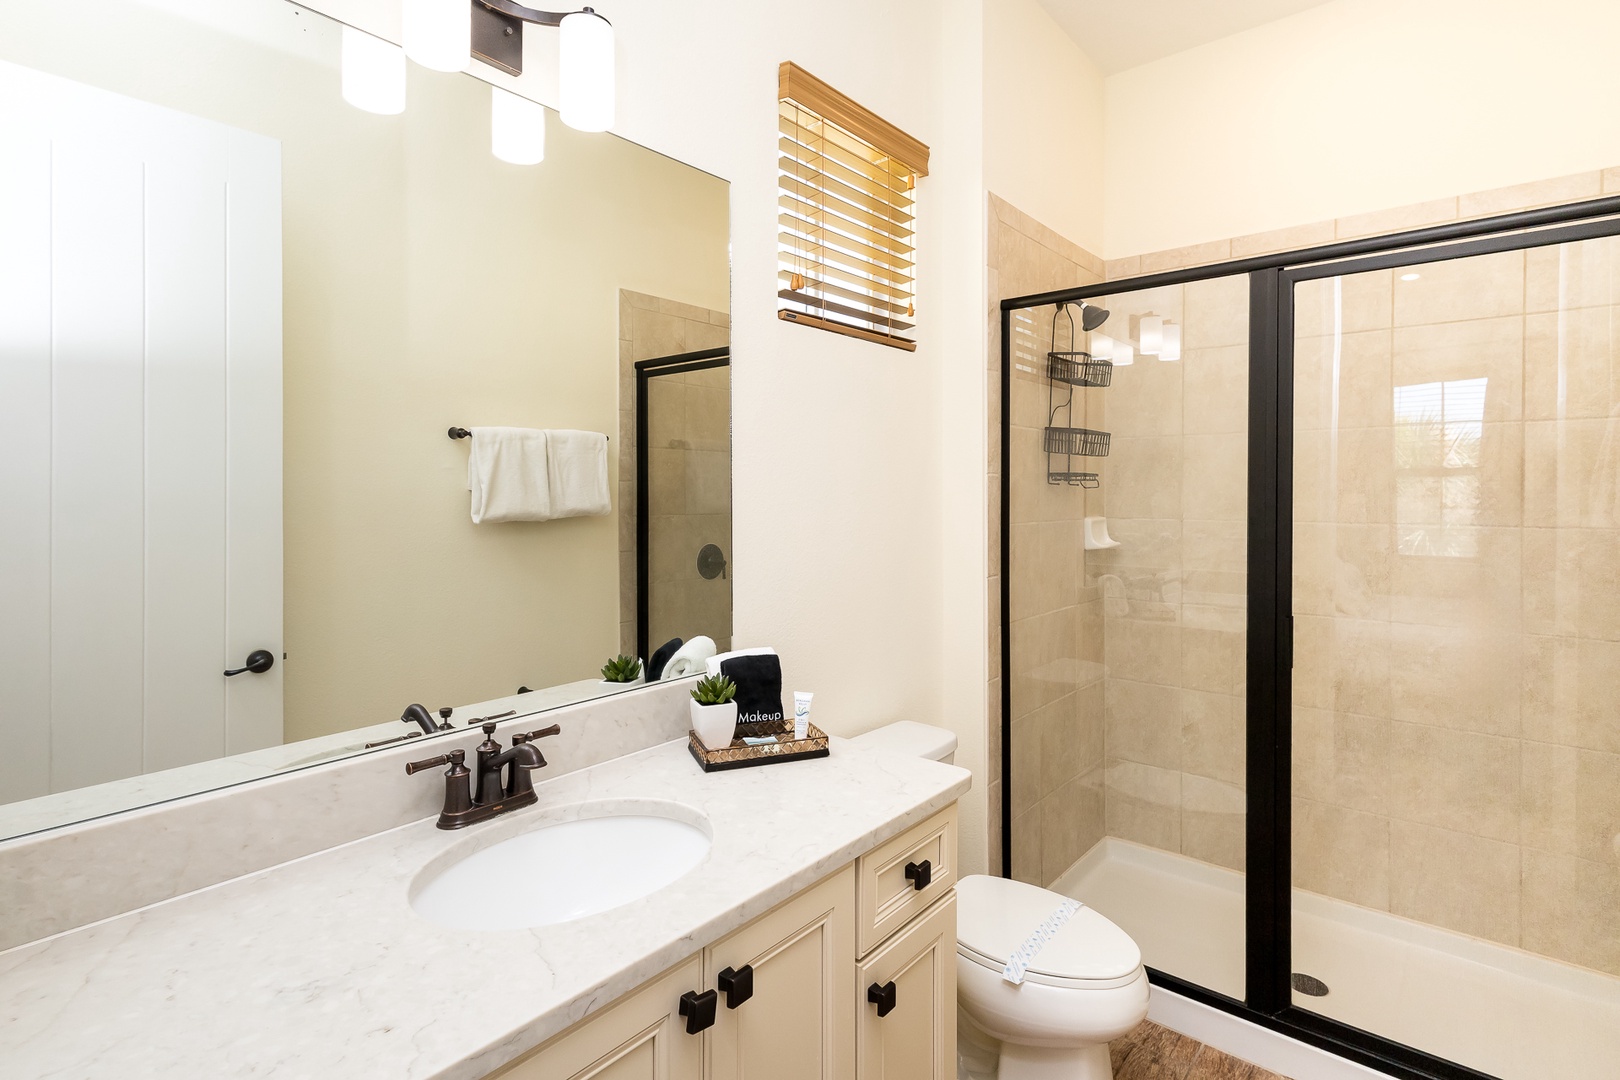 This 2nd-floor ensuite features a large single vanity & glass shower